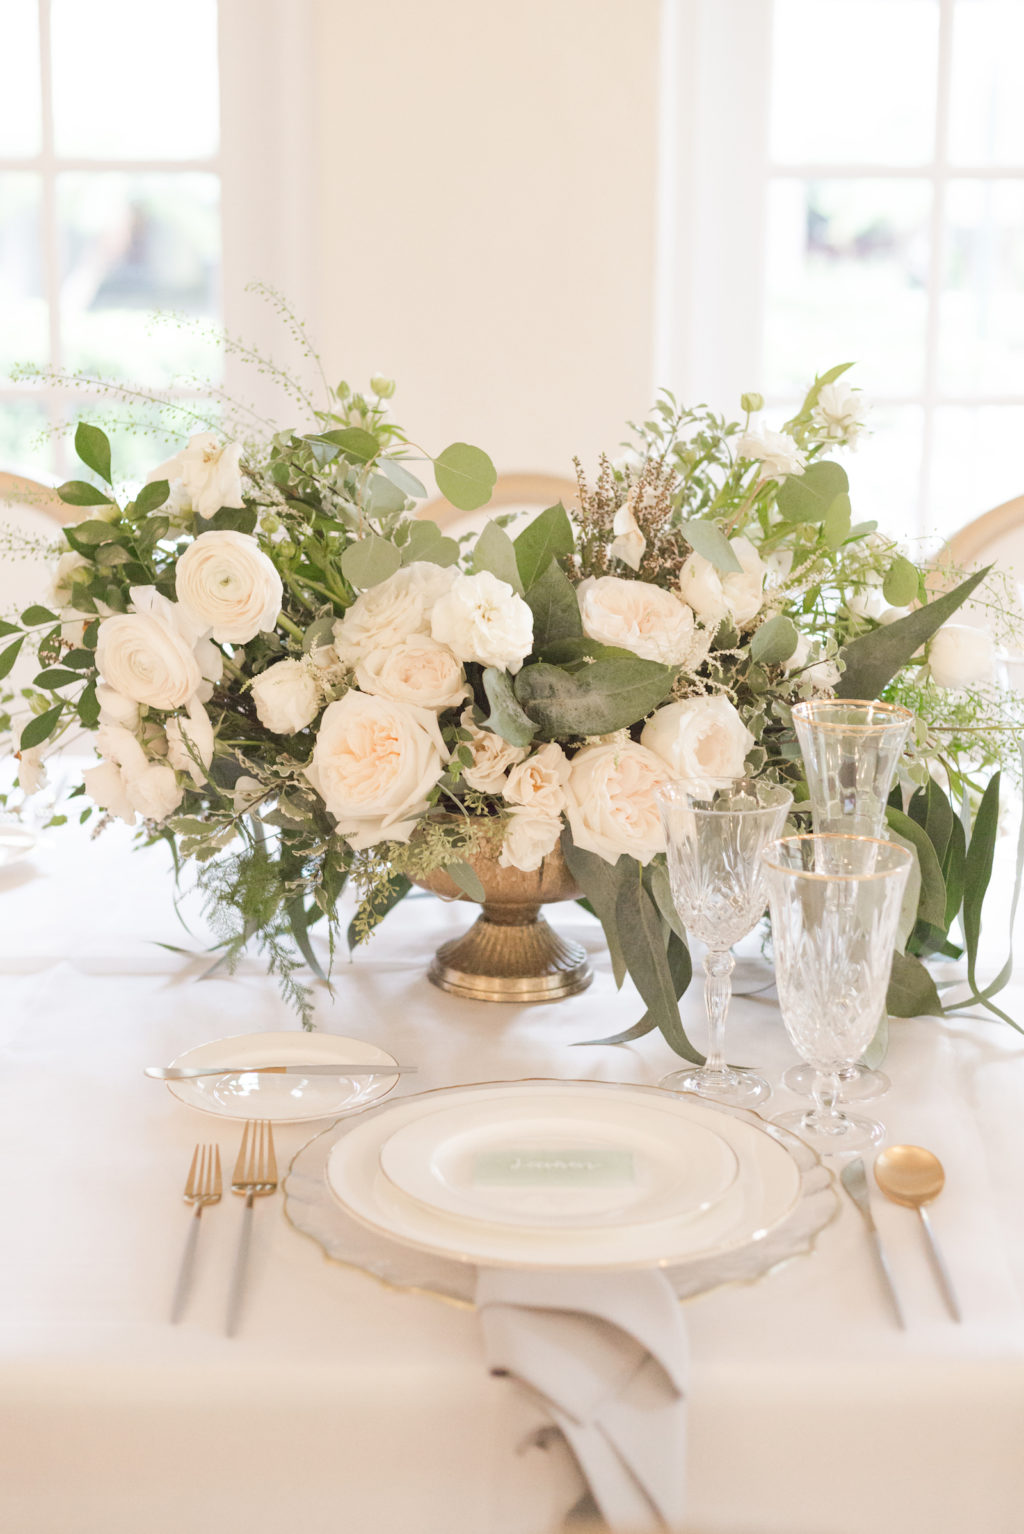 Southern Charm classic and timeless wedding reception decor, gold flatware, lush ivory roses, eucalyptus and greenery low floral centerpiece | Tampa Bay wedding planner and design Elegant Affairs by Design | Kate Ryan Event Rentals